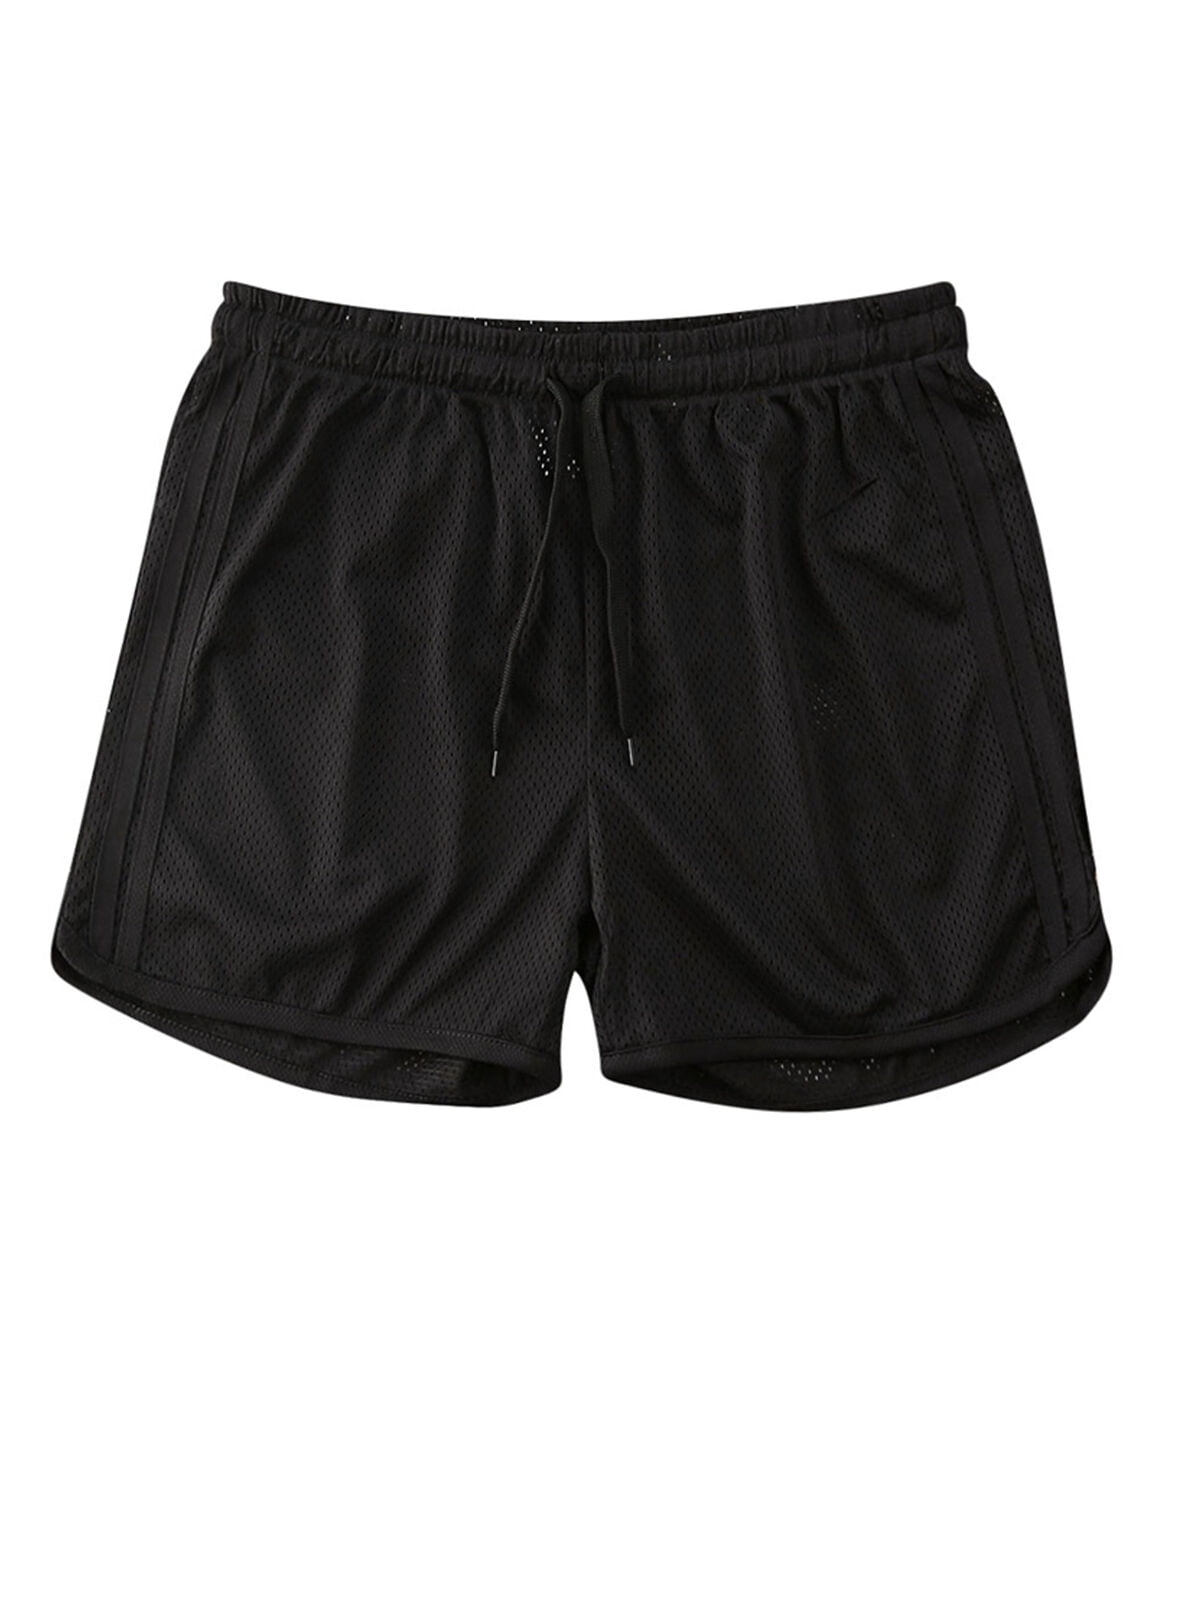 Mens Heavyweight Mesh Shorts with Pockets Basketball Gym Workout Short - Men > Shorts > Mesh | Hat and Beyond Small / Black